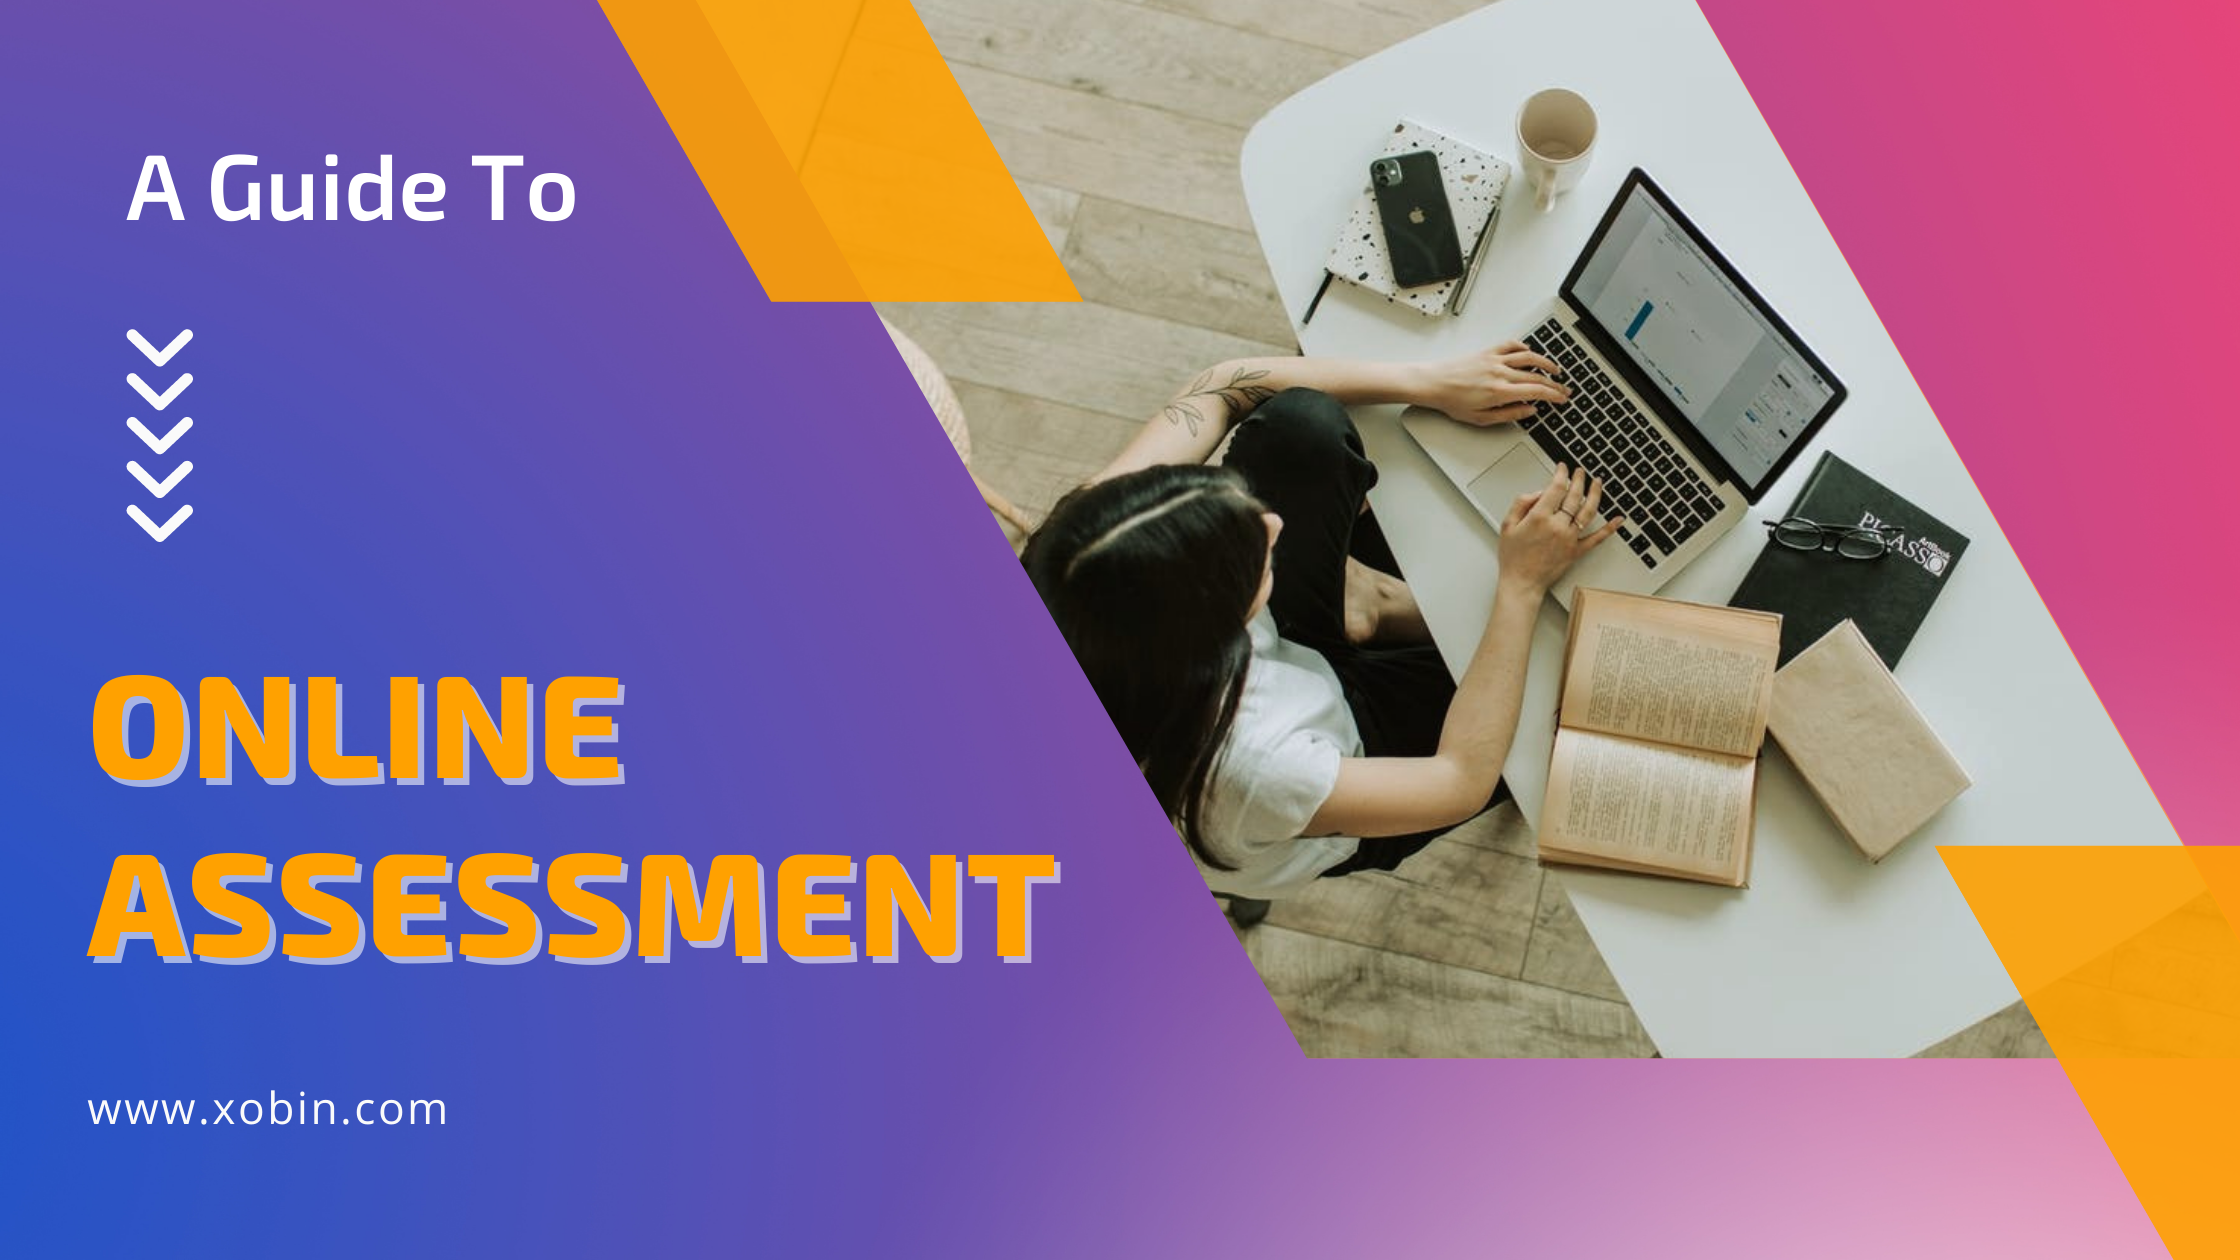 A Guide To Online Assessment